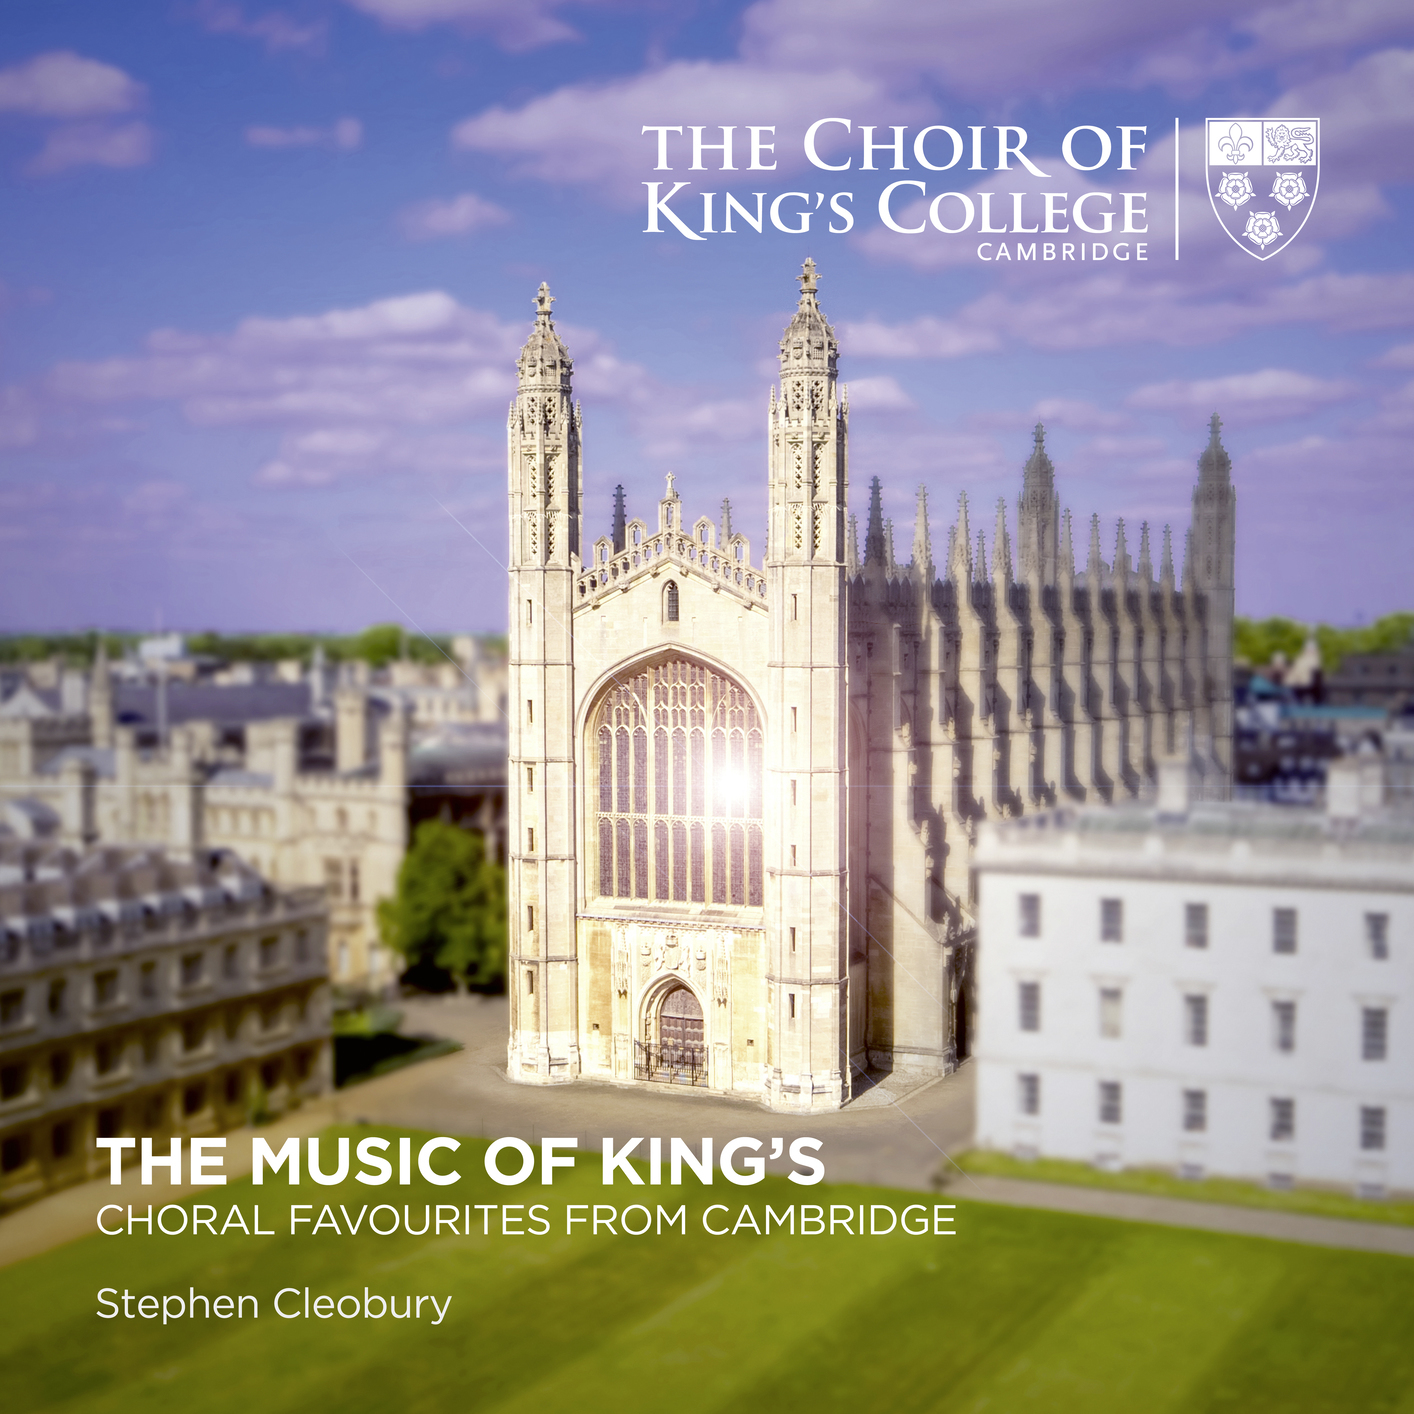 Stephen Cleobury & Choir of King’s College, Cambridge – The Music of King’s: Choral Favourites from Cambridge (2019) [FLAC 24bit/96kHz]